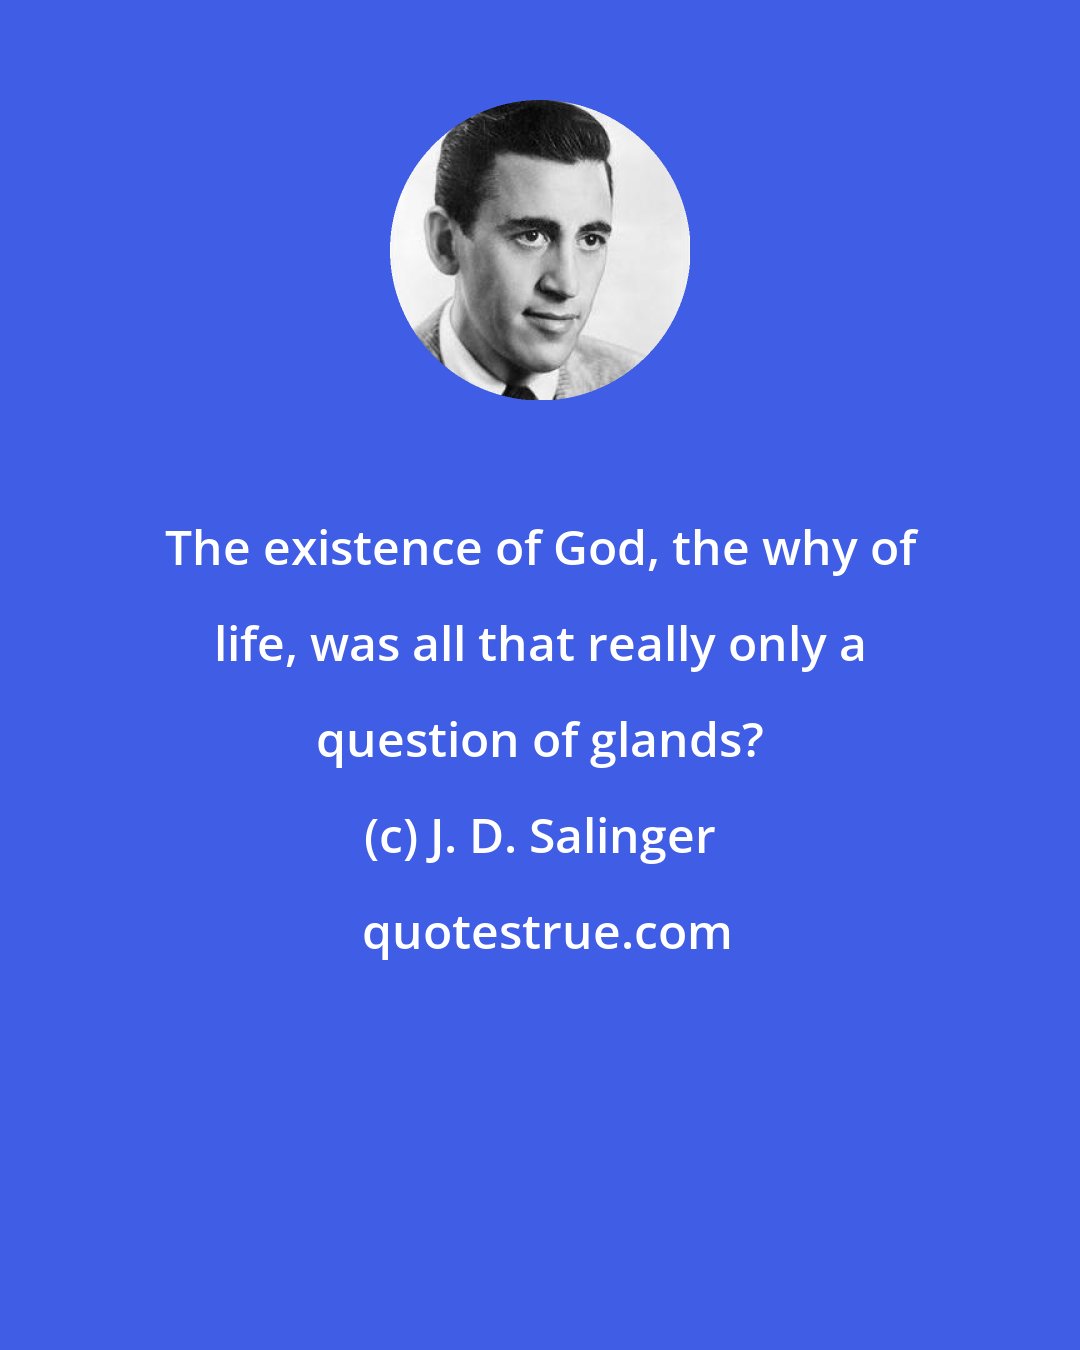 J. D. Salinger: The existence of God, the why of life, was all that really only a question of glands?